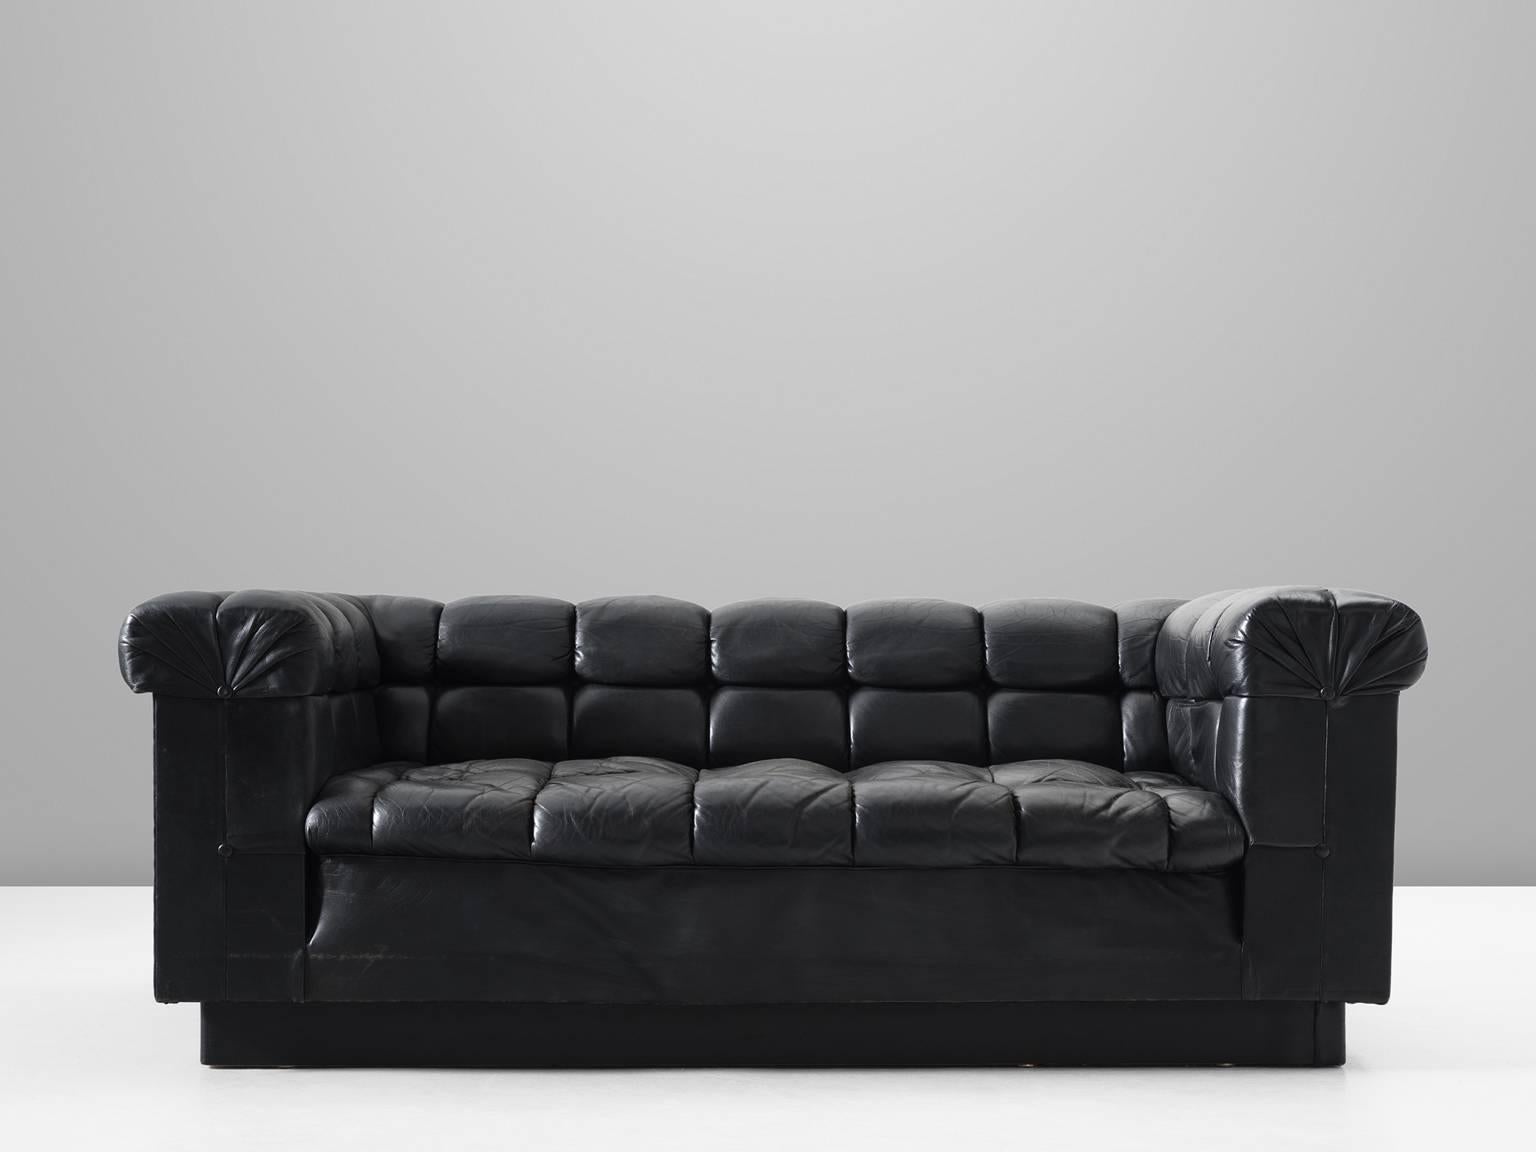 Edward Wormley Tufted Two-Seat Sofa in Black Leather (amerikanisch)